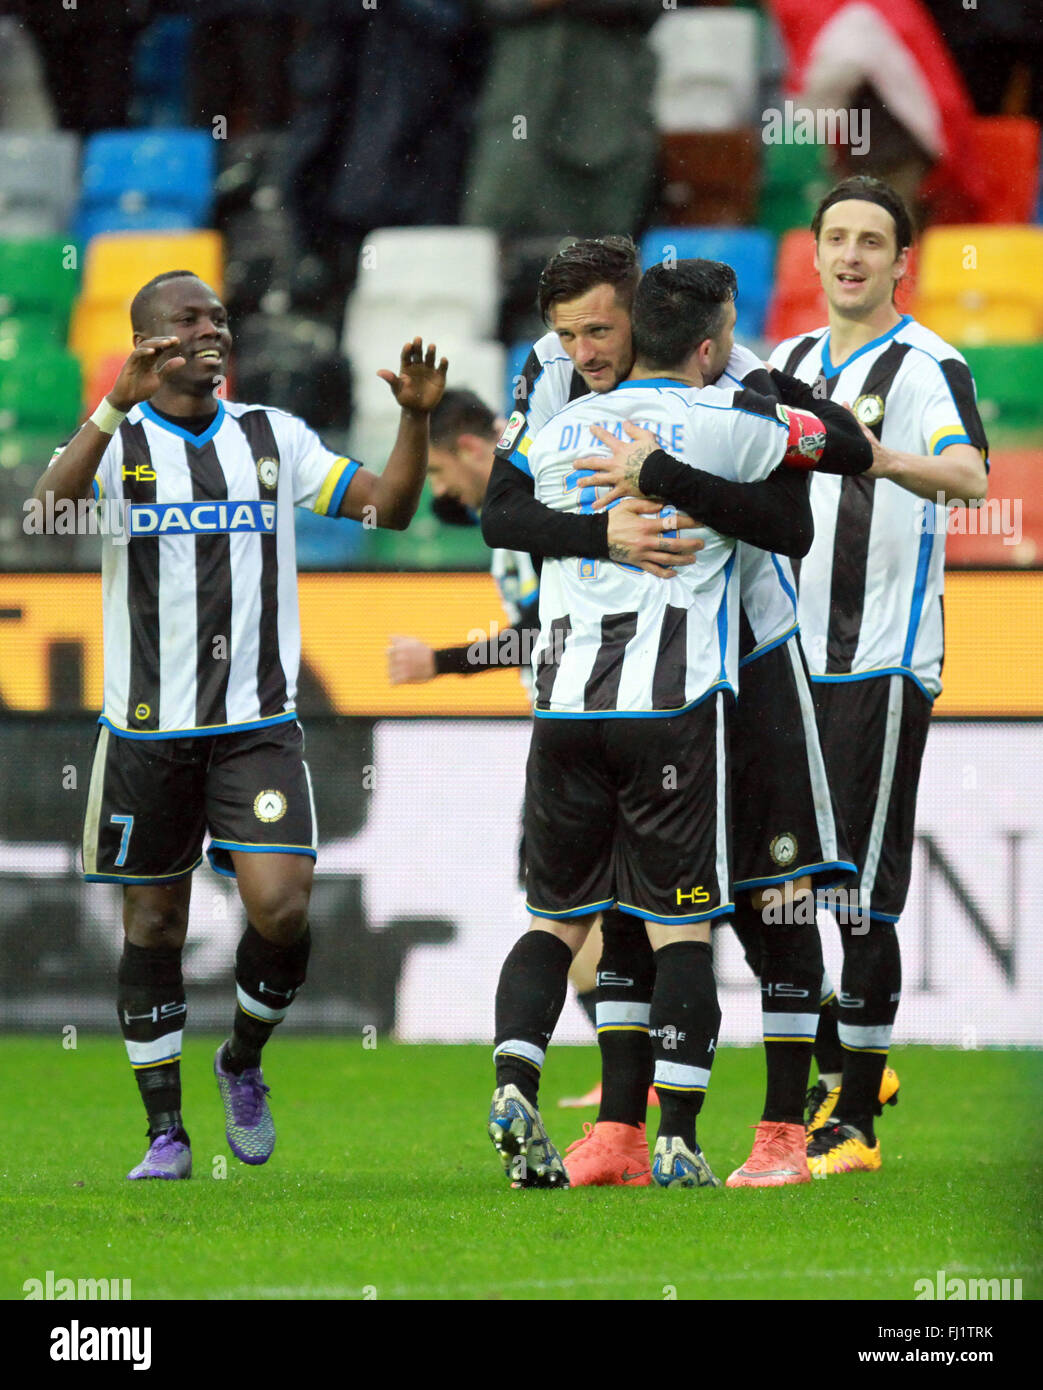 Udine, Italy. 28th Feb, 2016. Udinese's forward Cyril Thereau (R) celebrates after scoring a goal 2-0 with teammates Udinese's forward Antonio Di Natale and Udinese's midfielder Emmanuel Agyemang Badu (L) during the Italian Serie A football match between Udinese Calcio v Hellas Verona FC. Udinese beats 2-0 Hellas Verona in Italian Serie A football match, goals by Badu and Thereau at Dacia Arena in Udine. (Phoyo by Andrea Spinelli/Pacific Press) Credit:  PACIFIC PRESS/Alamy Live News Stock Photo